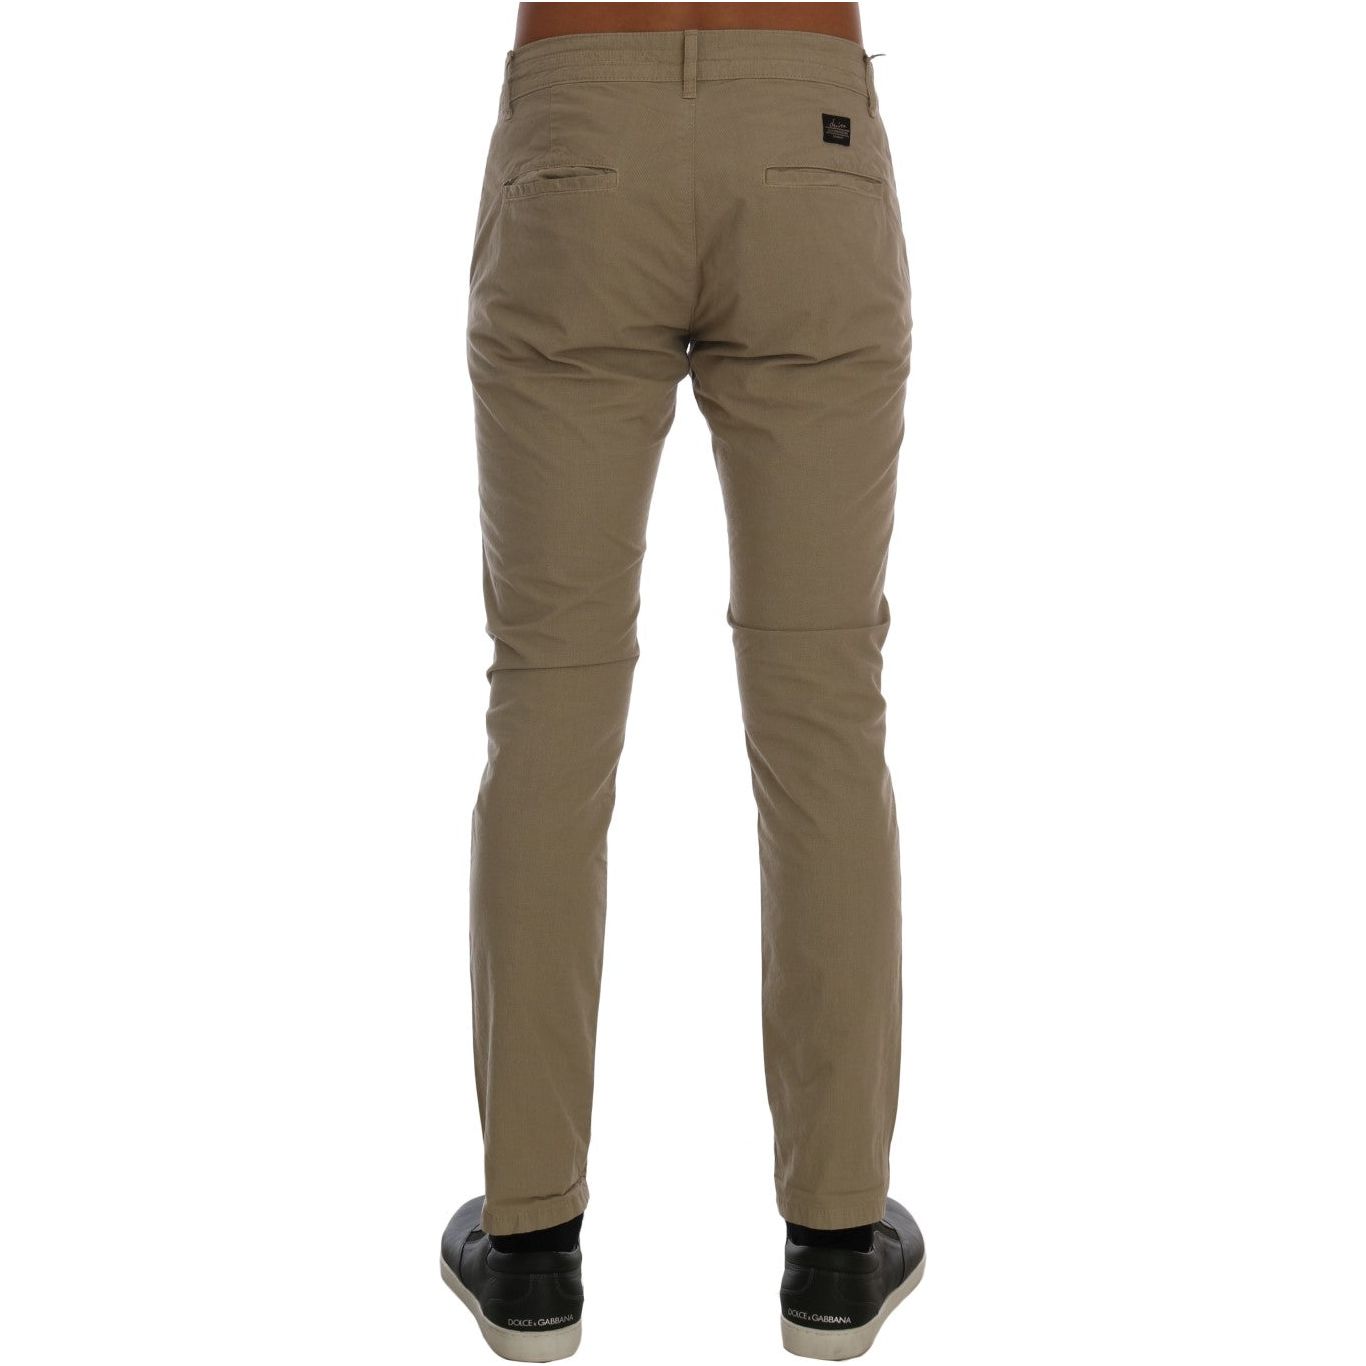 Daniele Alessandrini Beige Slim Fit Chinos for Sophisticated Style Jeans & Pants beige-cotton-stretch-slim-fit-chinos 457192-beige-cotton-stretch-slim-fit-chinos-2.jpg